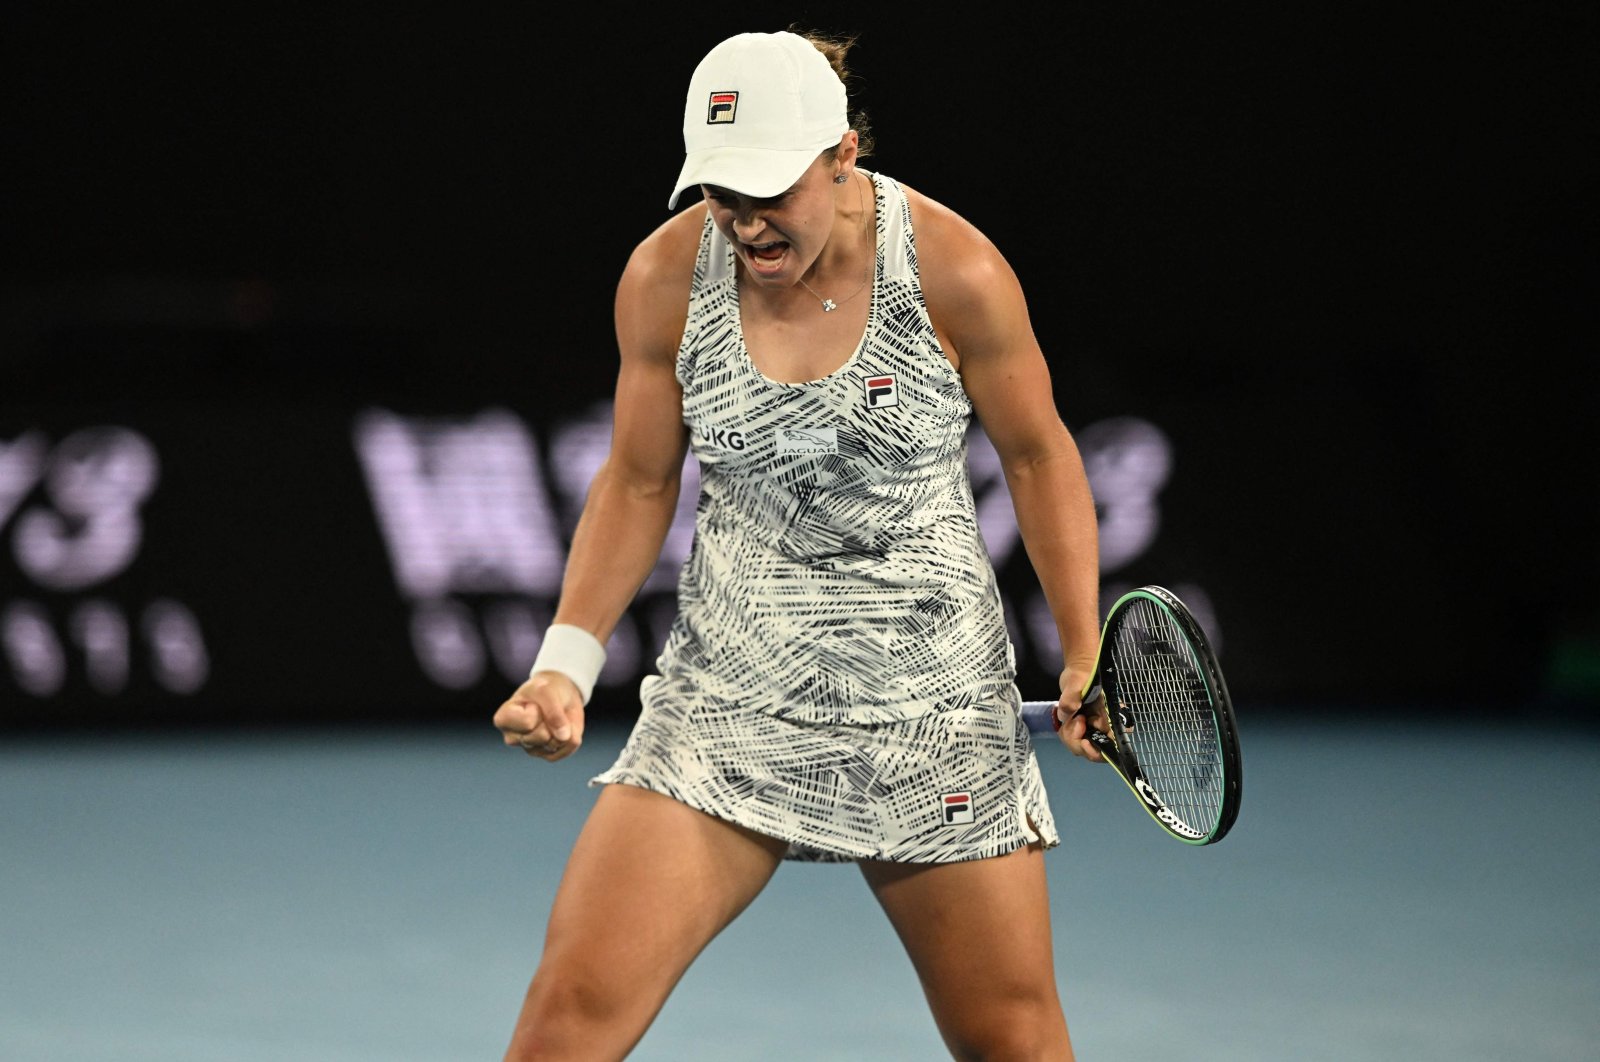 Australia&#039;s Ashleigh Barty reacts after winning against Danielle Collins of the U.S. during their women&#039;s singles final match on day thirteen of the Australian Open tennis tournament in Melbourne on Jan. 29, 2022. (AFP Photo)